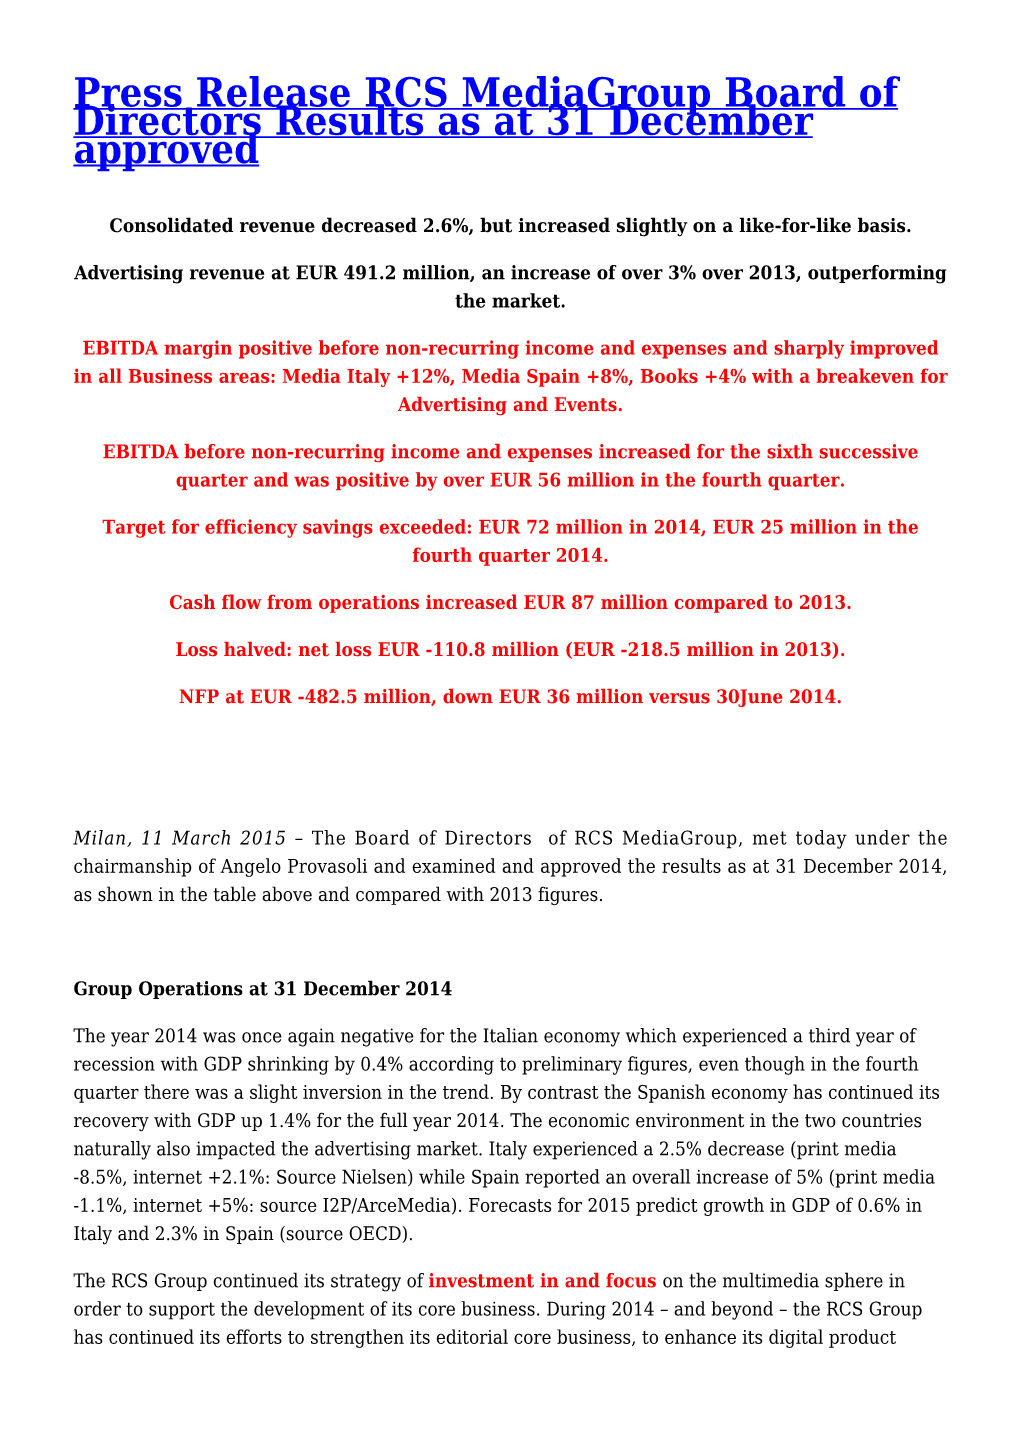 Press Release RCS Mediagroup Board of Directors Results As at 31 December Approved